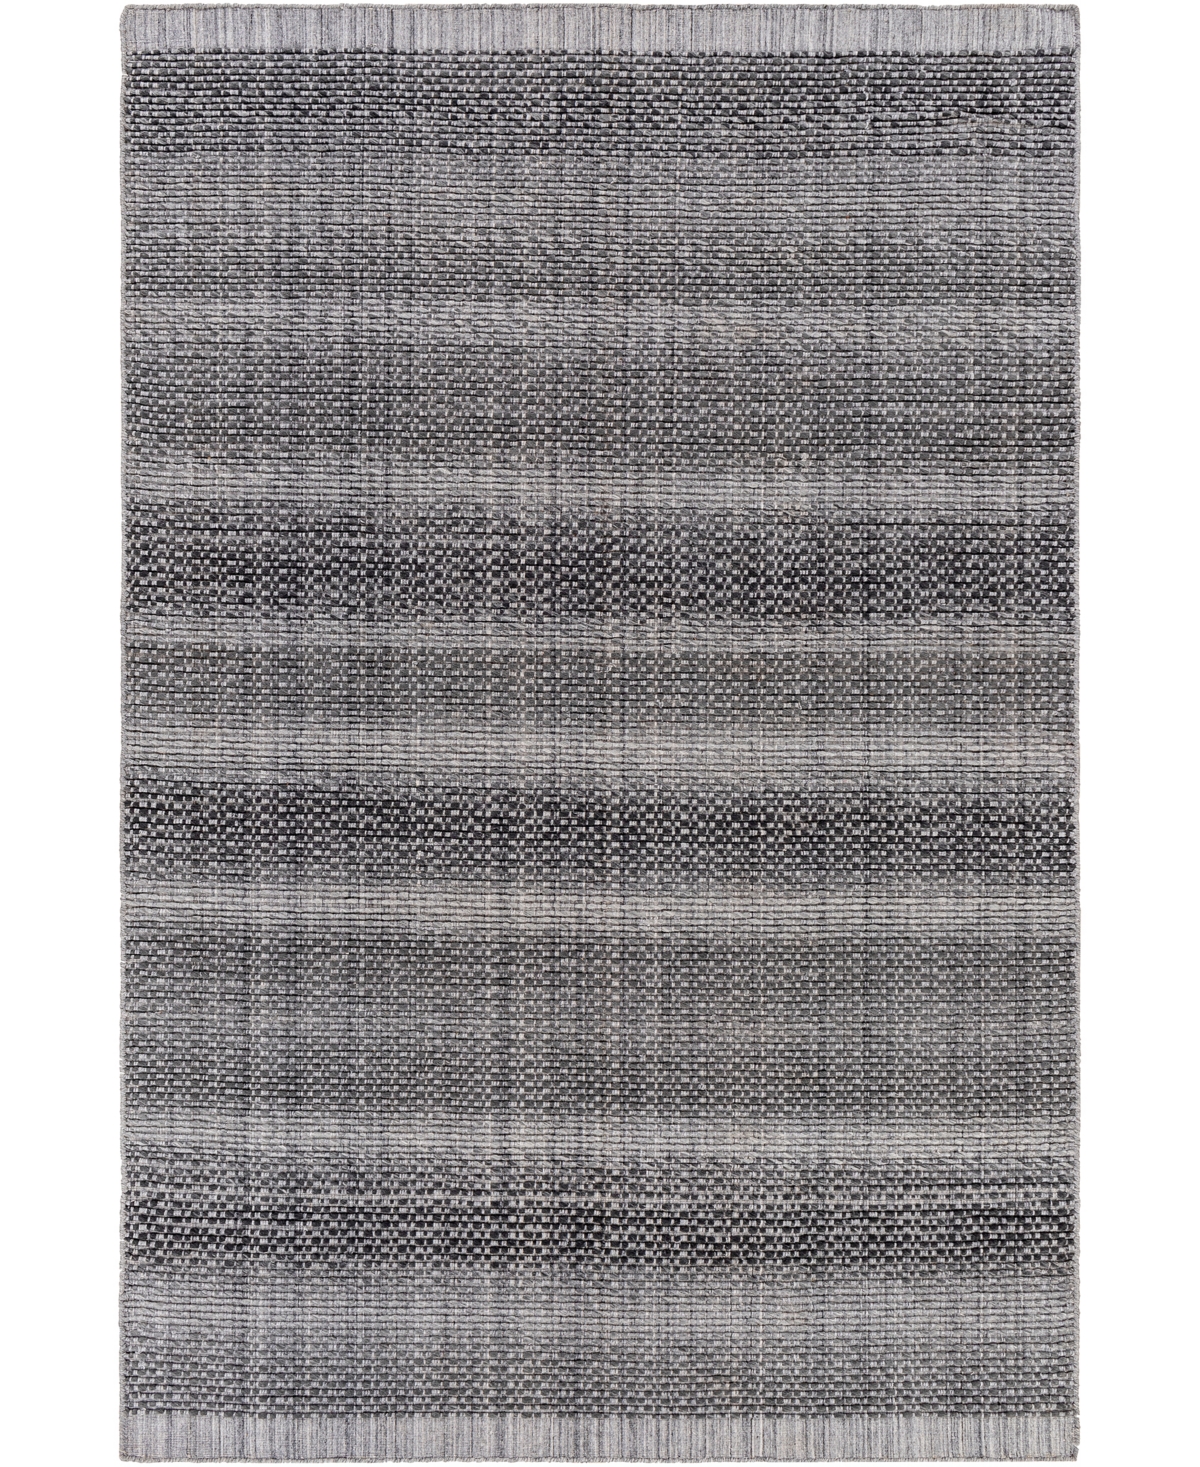 Surya Sycamore Syc-2301 8in x 10' Outdoor Area Rug - Charcoal